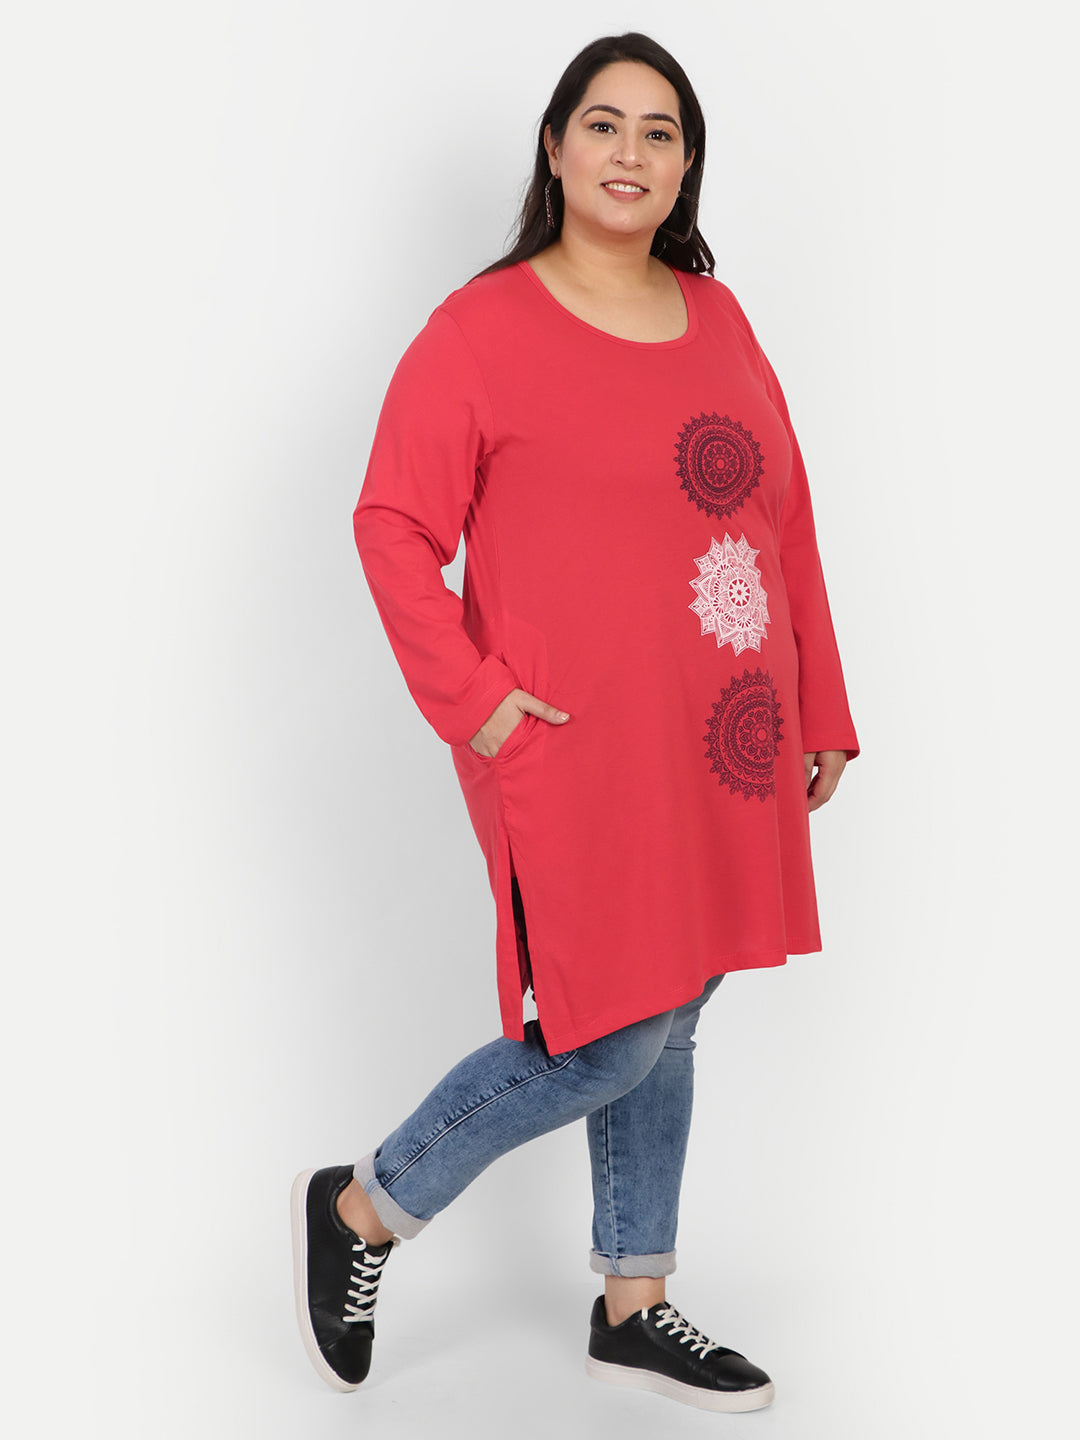 Cotton Long Top for Women Plus Size - Full Sleeve - Red At Online